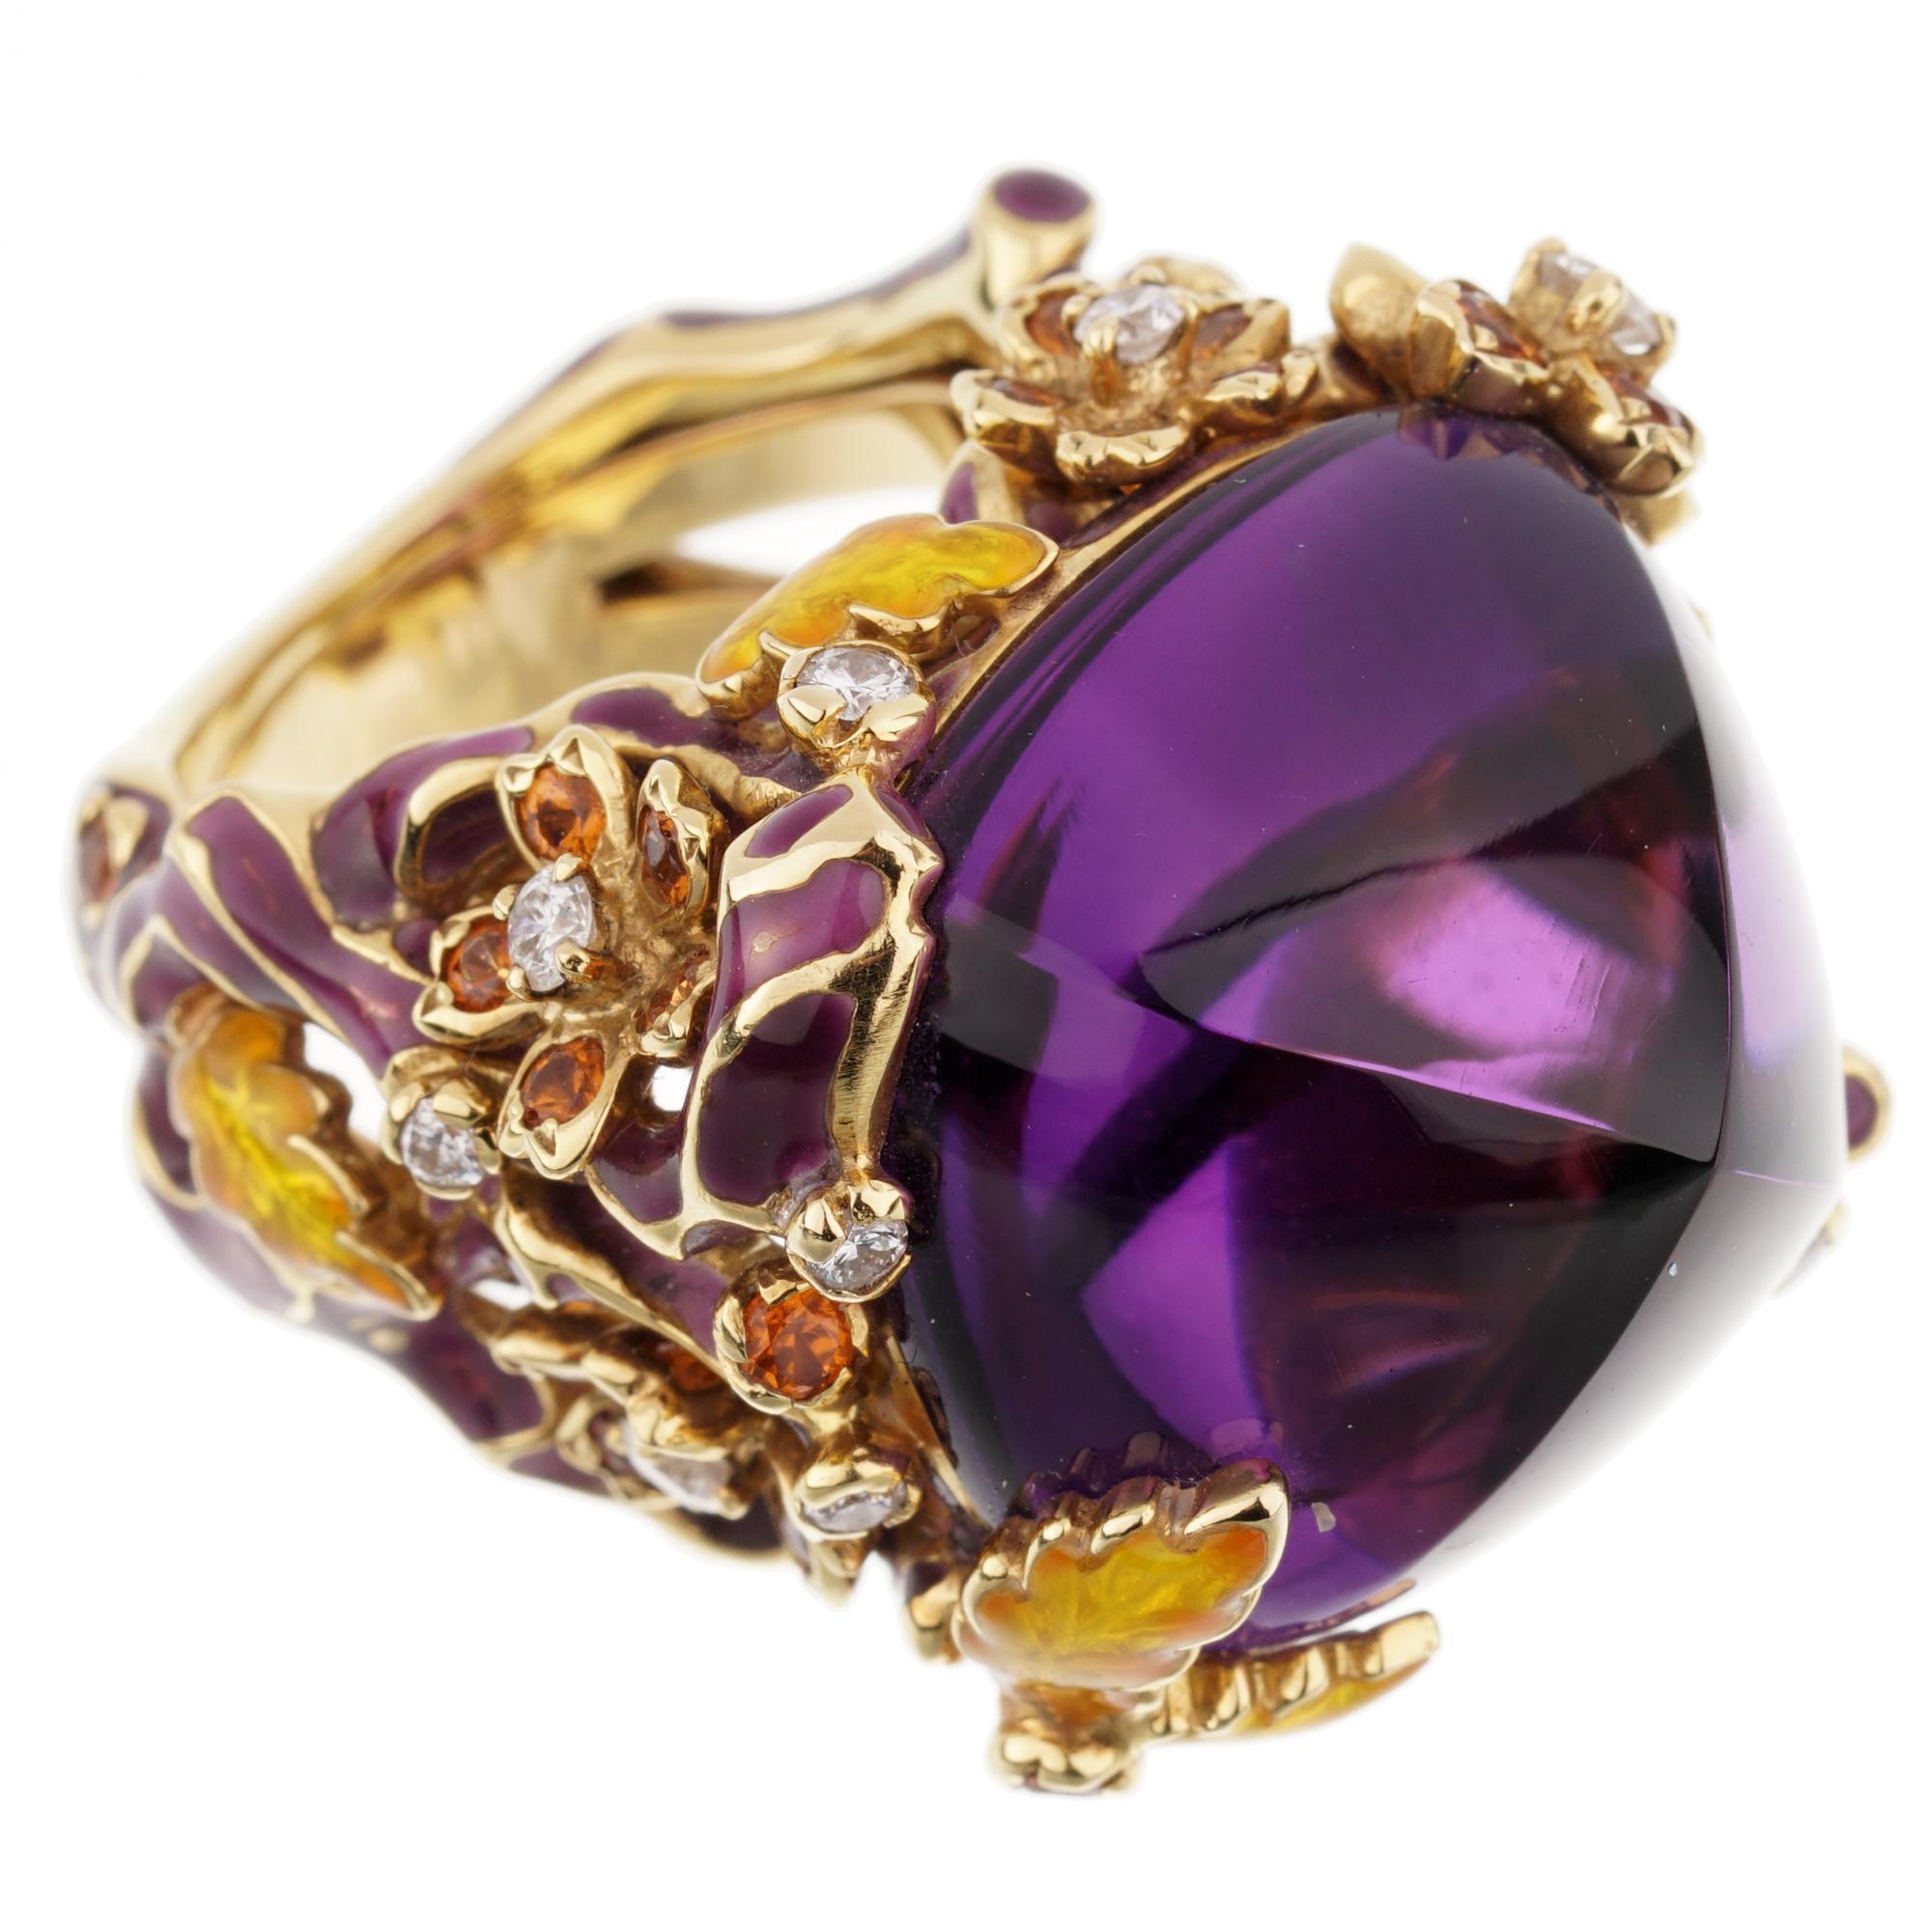 An incredible Dior cocktail showcasing a 40ct sugarloaf cut amethyst adorned with .72ct of round brilliant cut diamonds and 1.63ct of garnet in 18k yellow gold.

The ring retails for 37,000 +Tax USD and comes with the original Dior box

Sku: 2776
